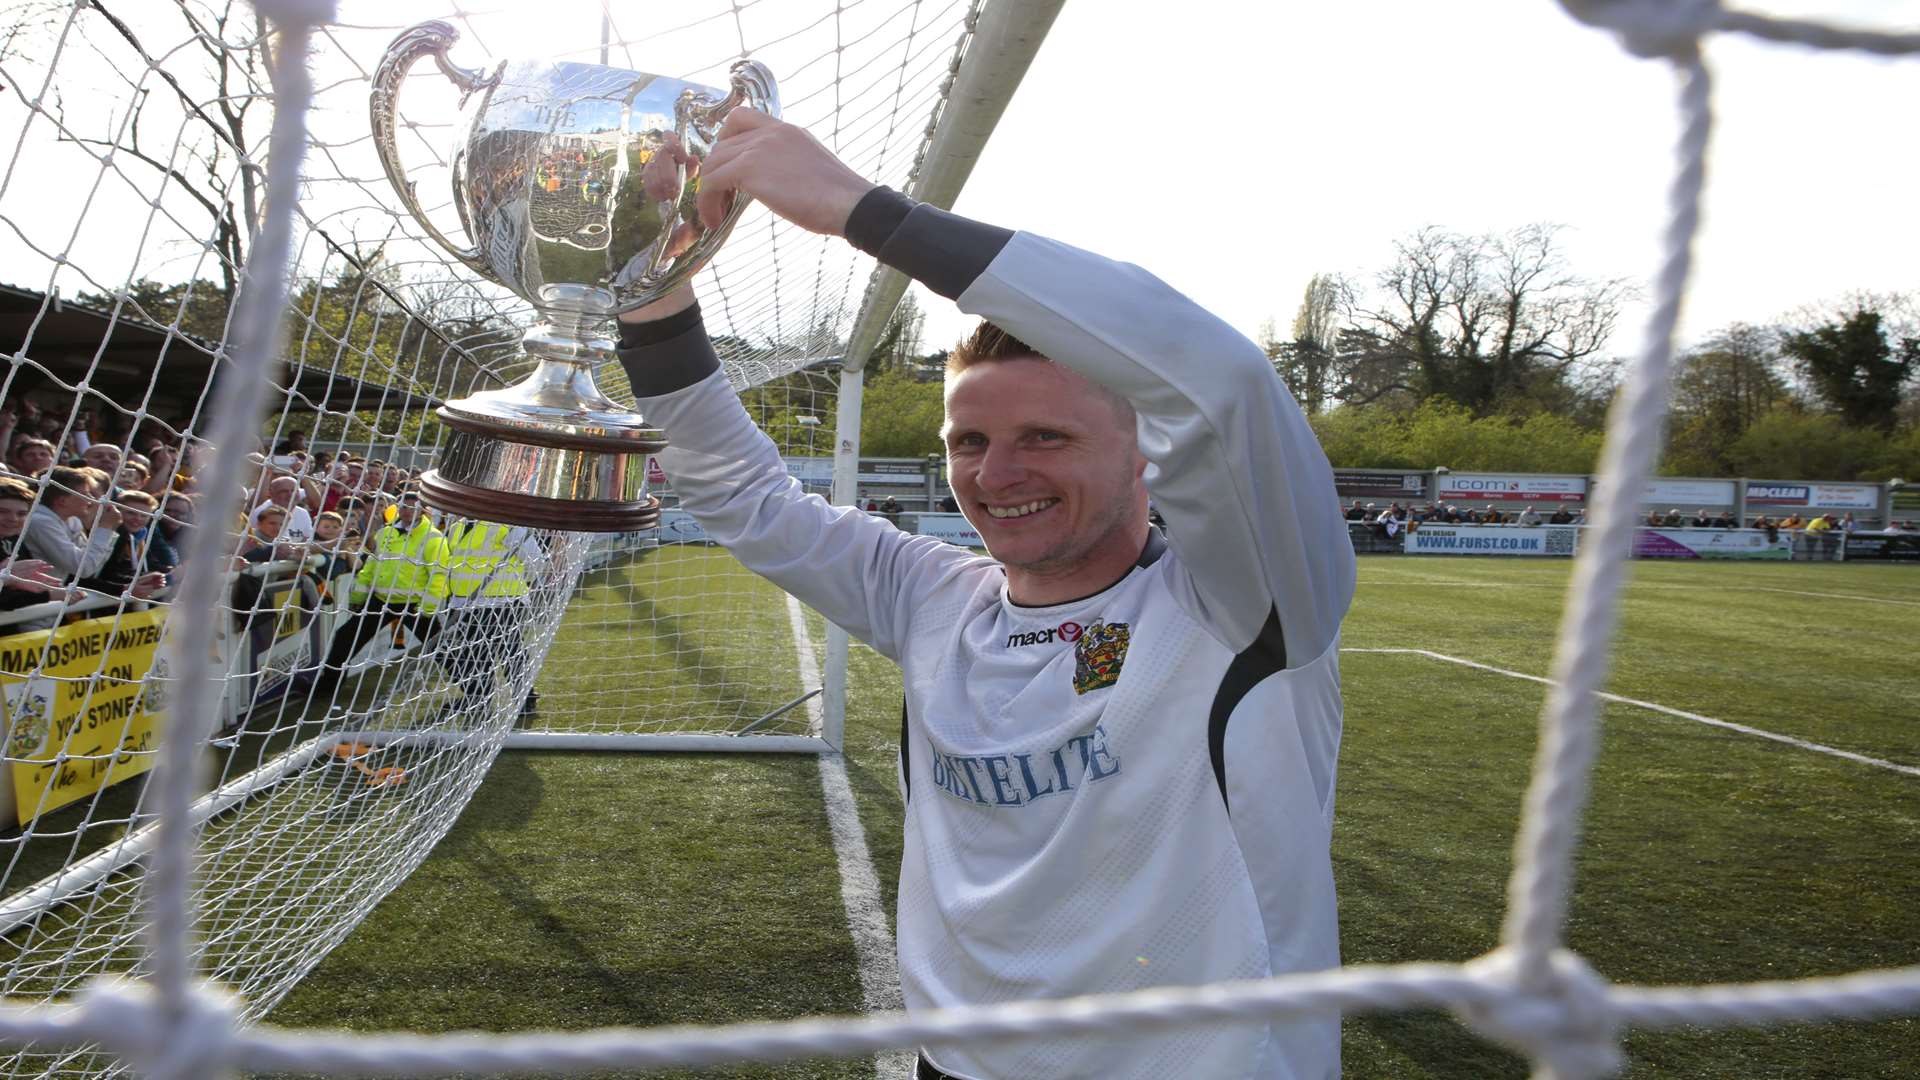 Lee Worgan with the Ryman League Premier Division trophy Picture: Martin Apps